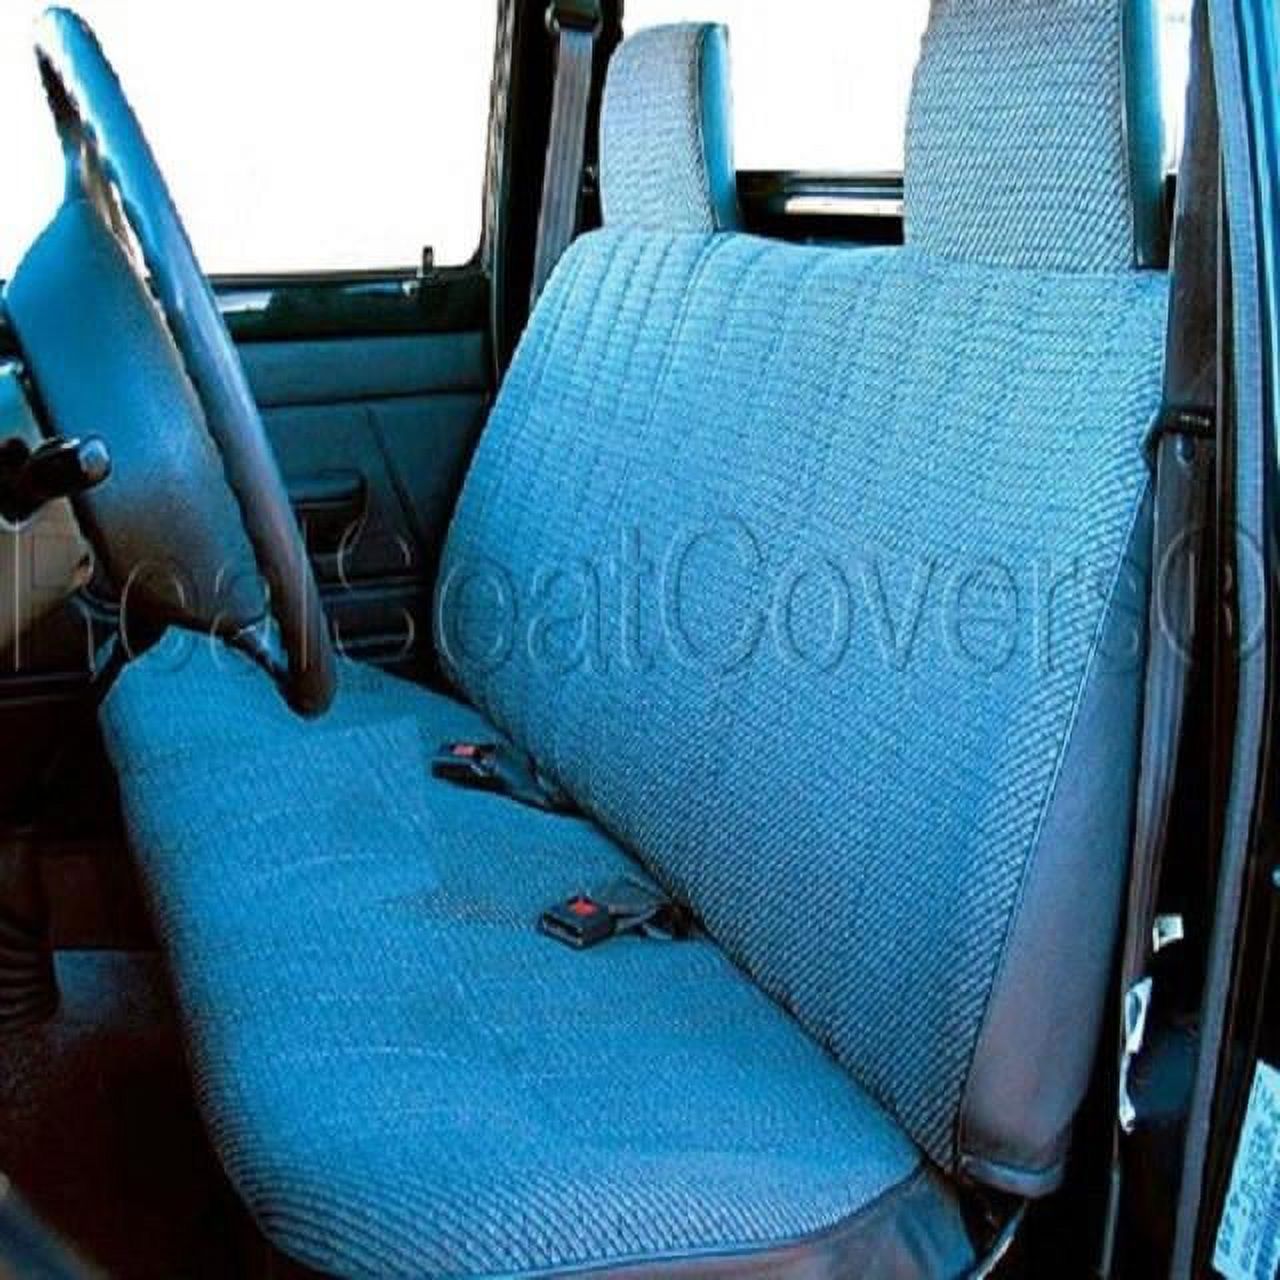 Seat Cover for Toyota Tacoma 1995 - 2004 Front Solid Bench Molded Headrest RealSeatCovers A23 Blue - image 1 of 4